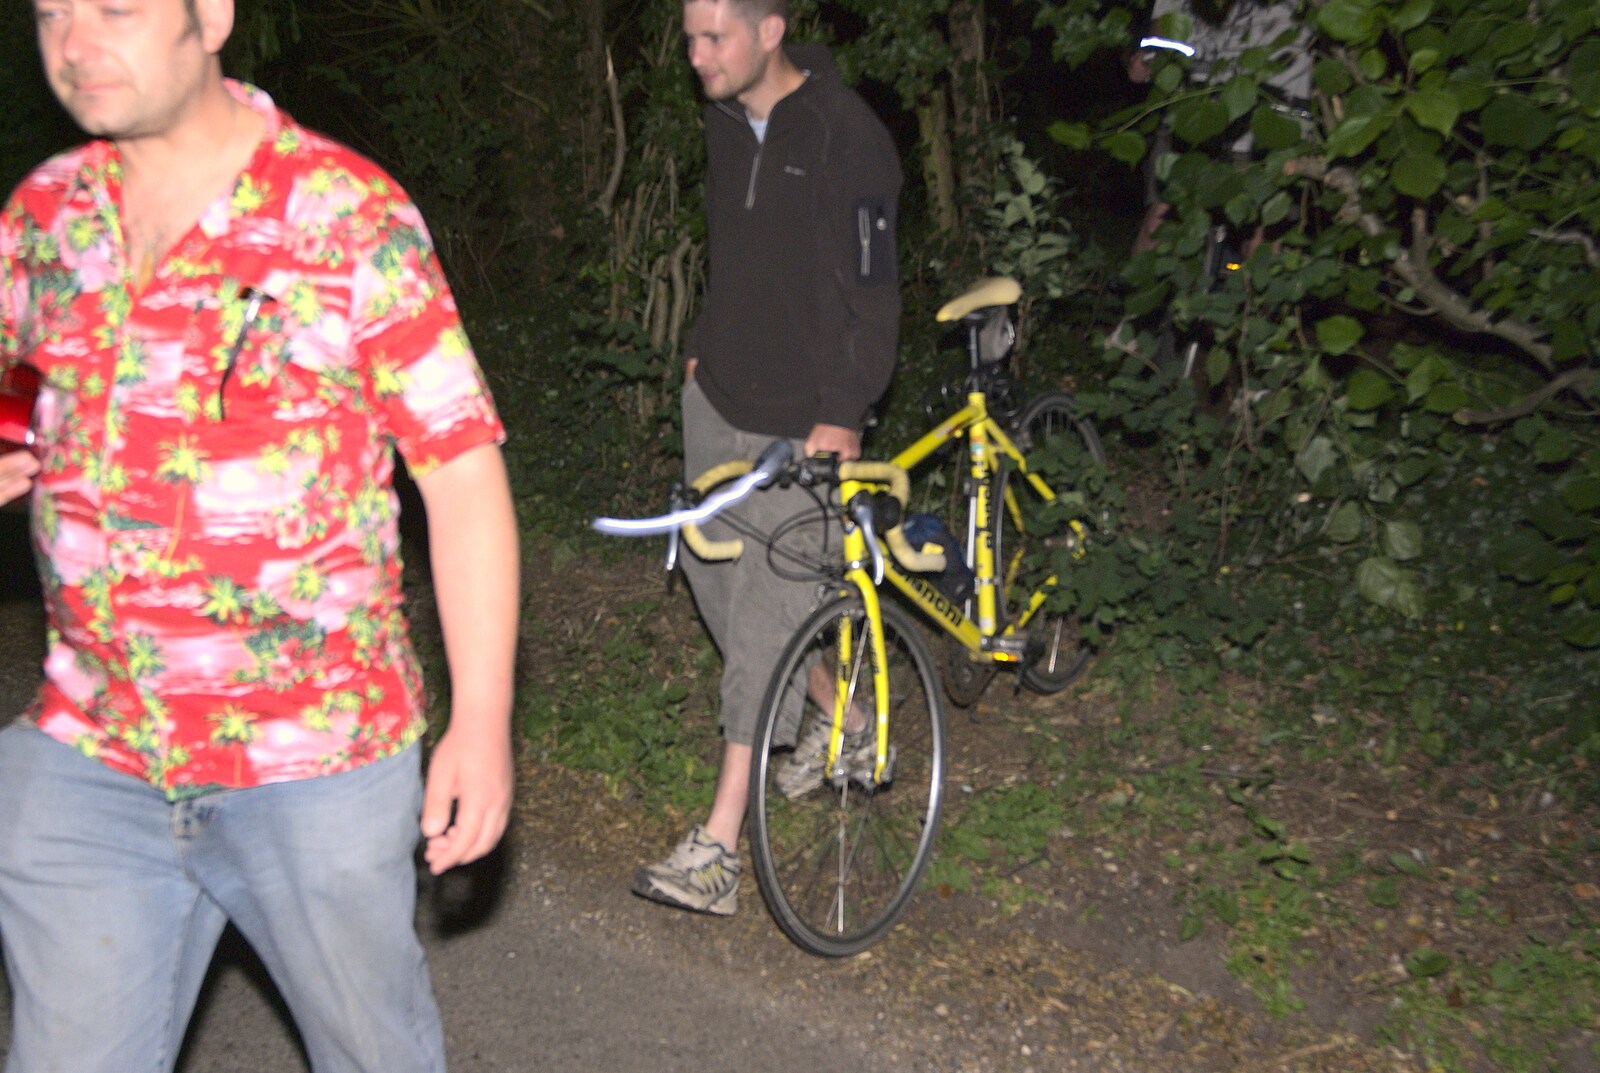 Phil drags his bike through the hedge from Wedding-Eve Beers at The Swan Inn, Brome, Suffolk - 2nd July 2010